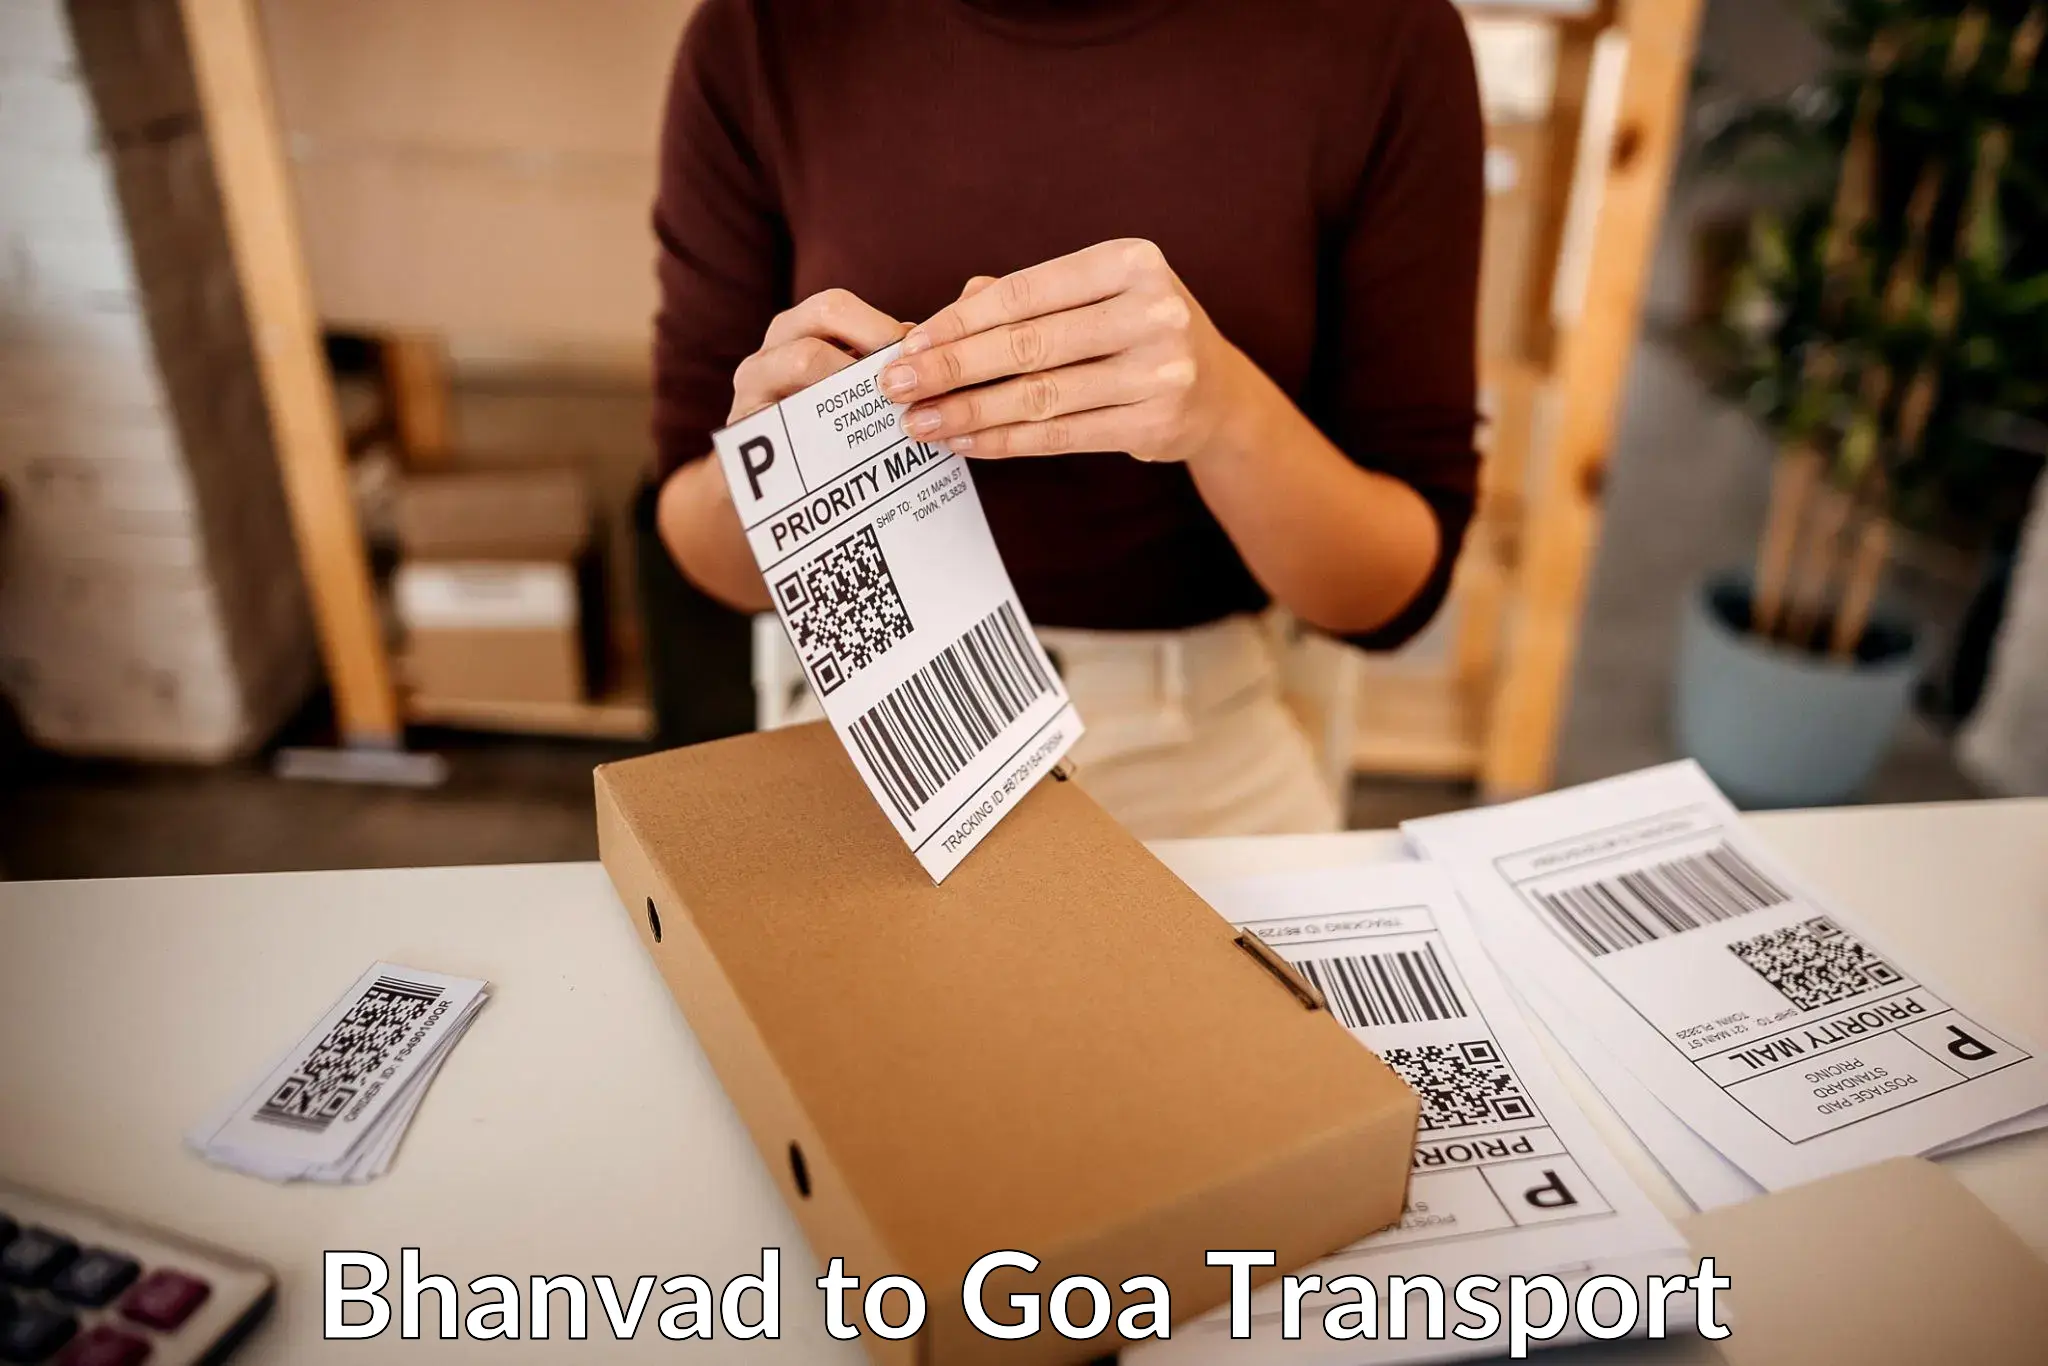 Daily parcel service transport Bhanvad to Panaji